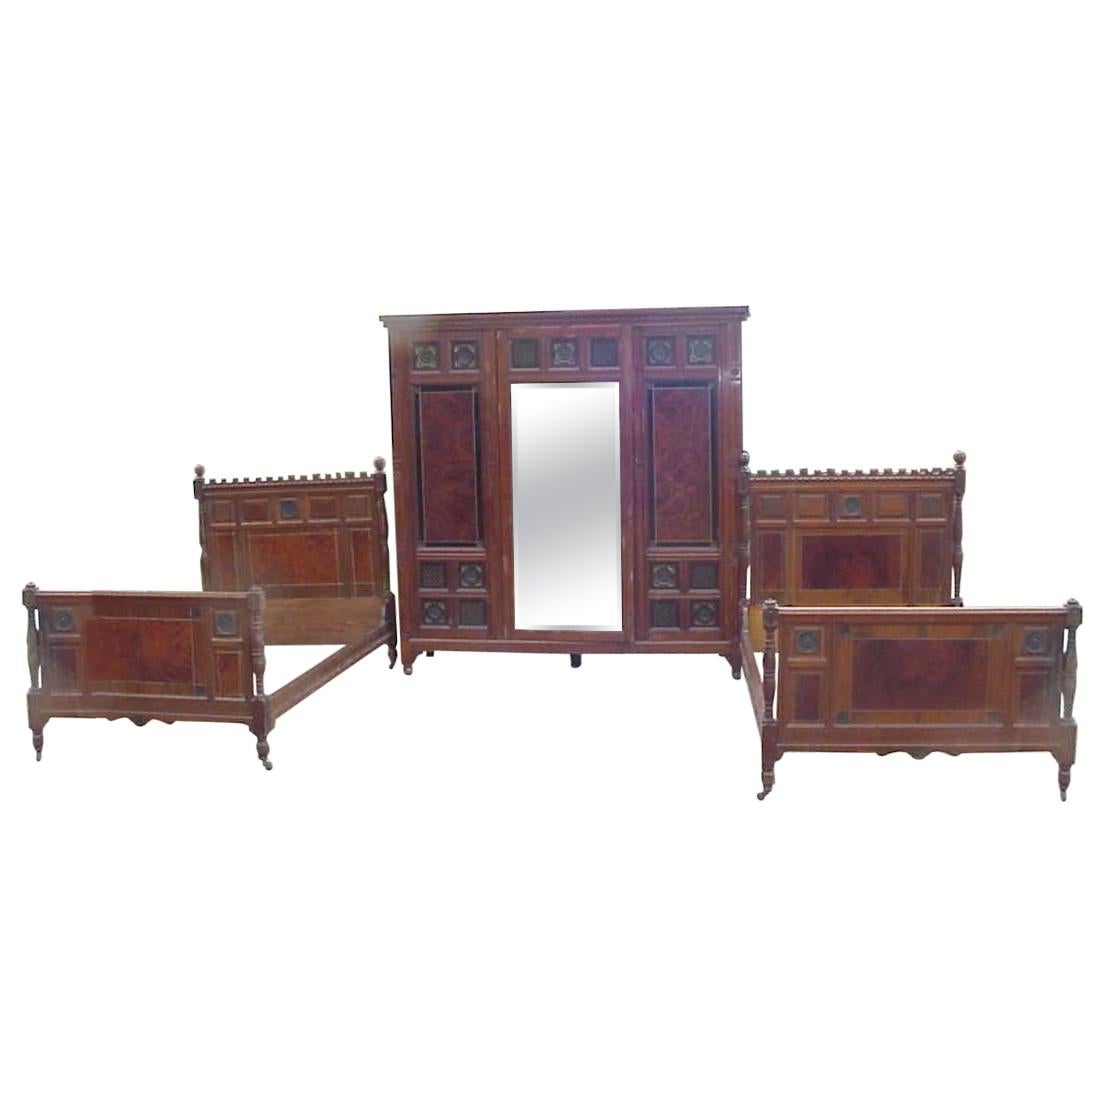 Bruce Talbert for Gillow. A Walnut, Amboyna, Ebonized and Gilt Bedroom Suite. For Sale